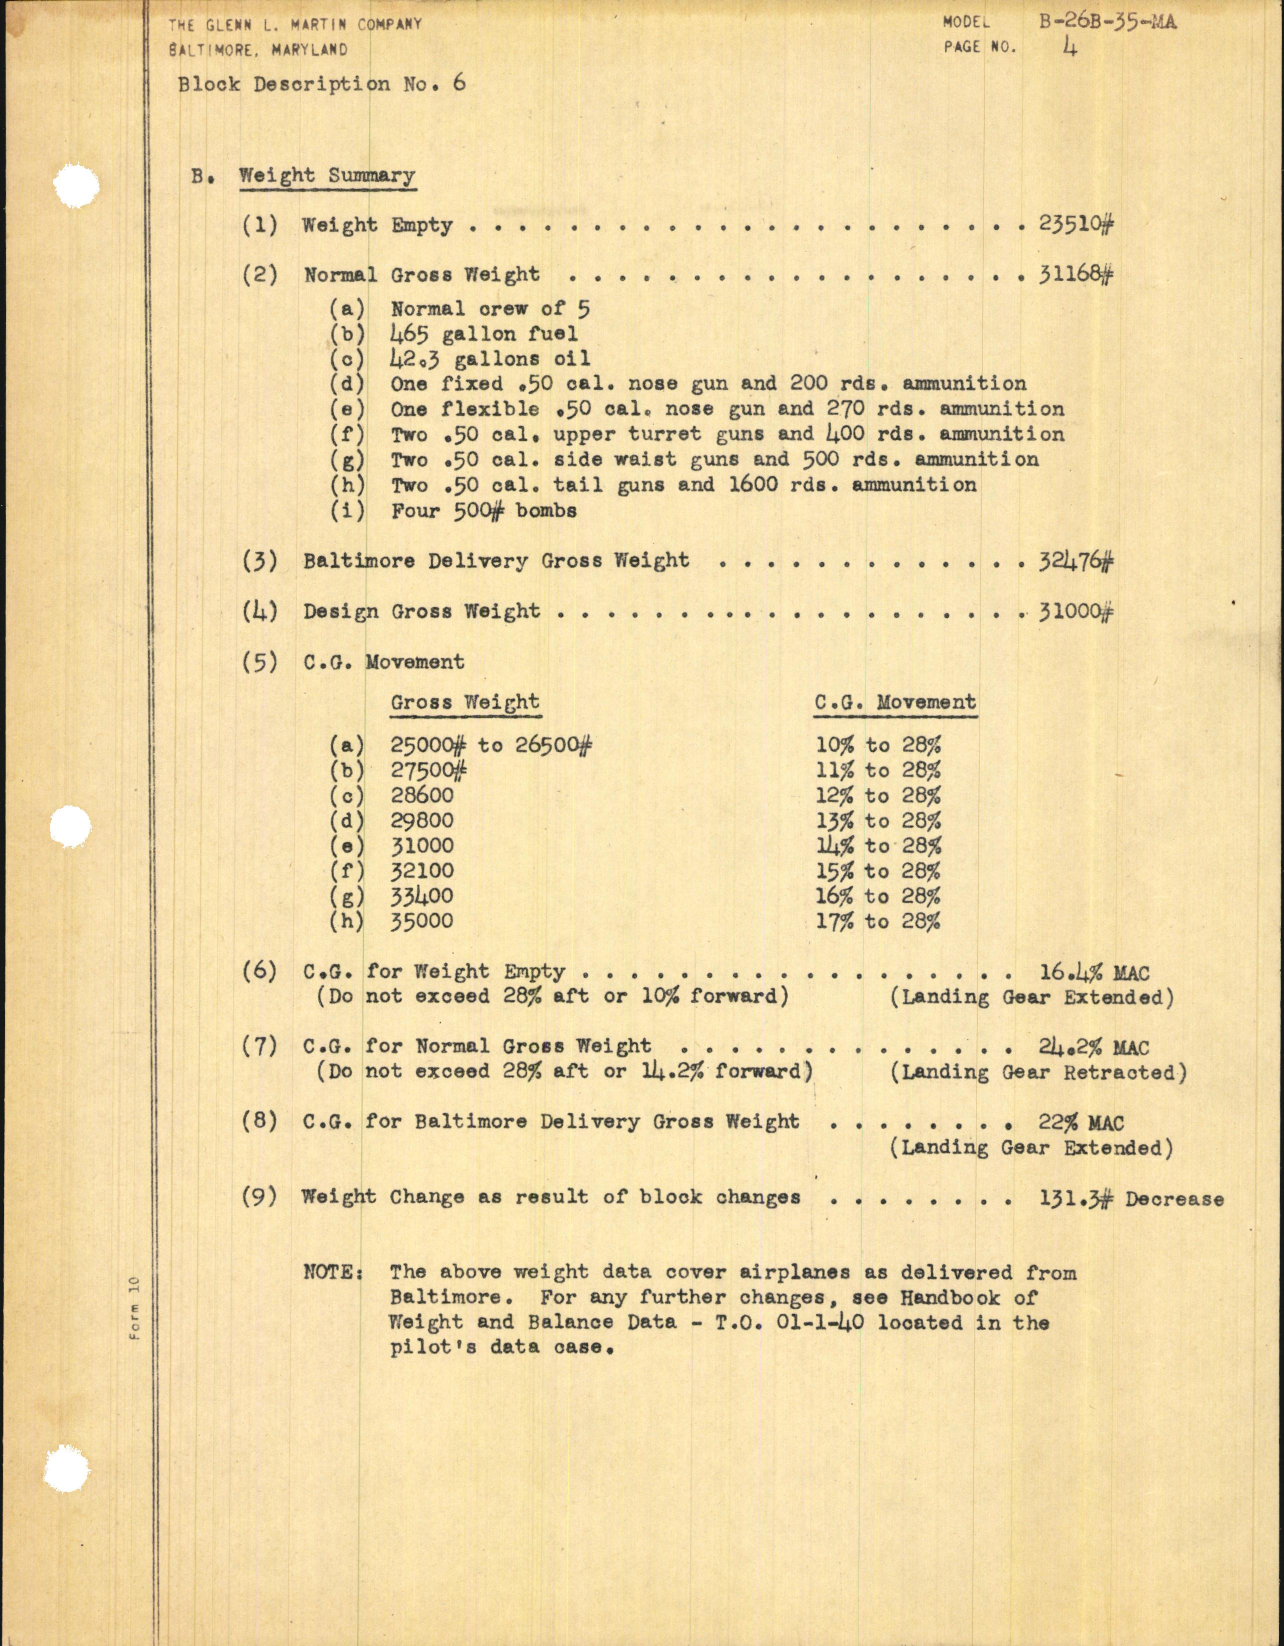 Sample page 11 from AirCorps Library document: Block Description for Air Corps Model B-26B-35-MA Bombardment Airplane